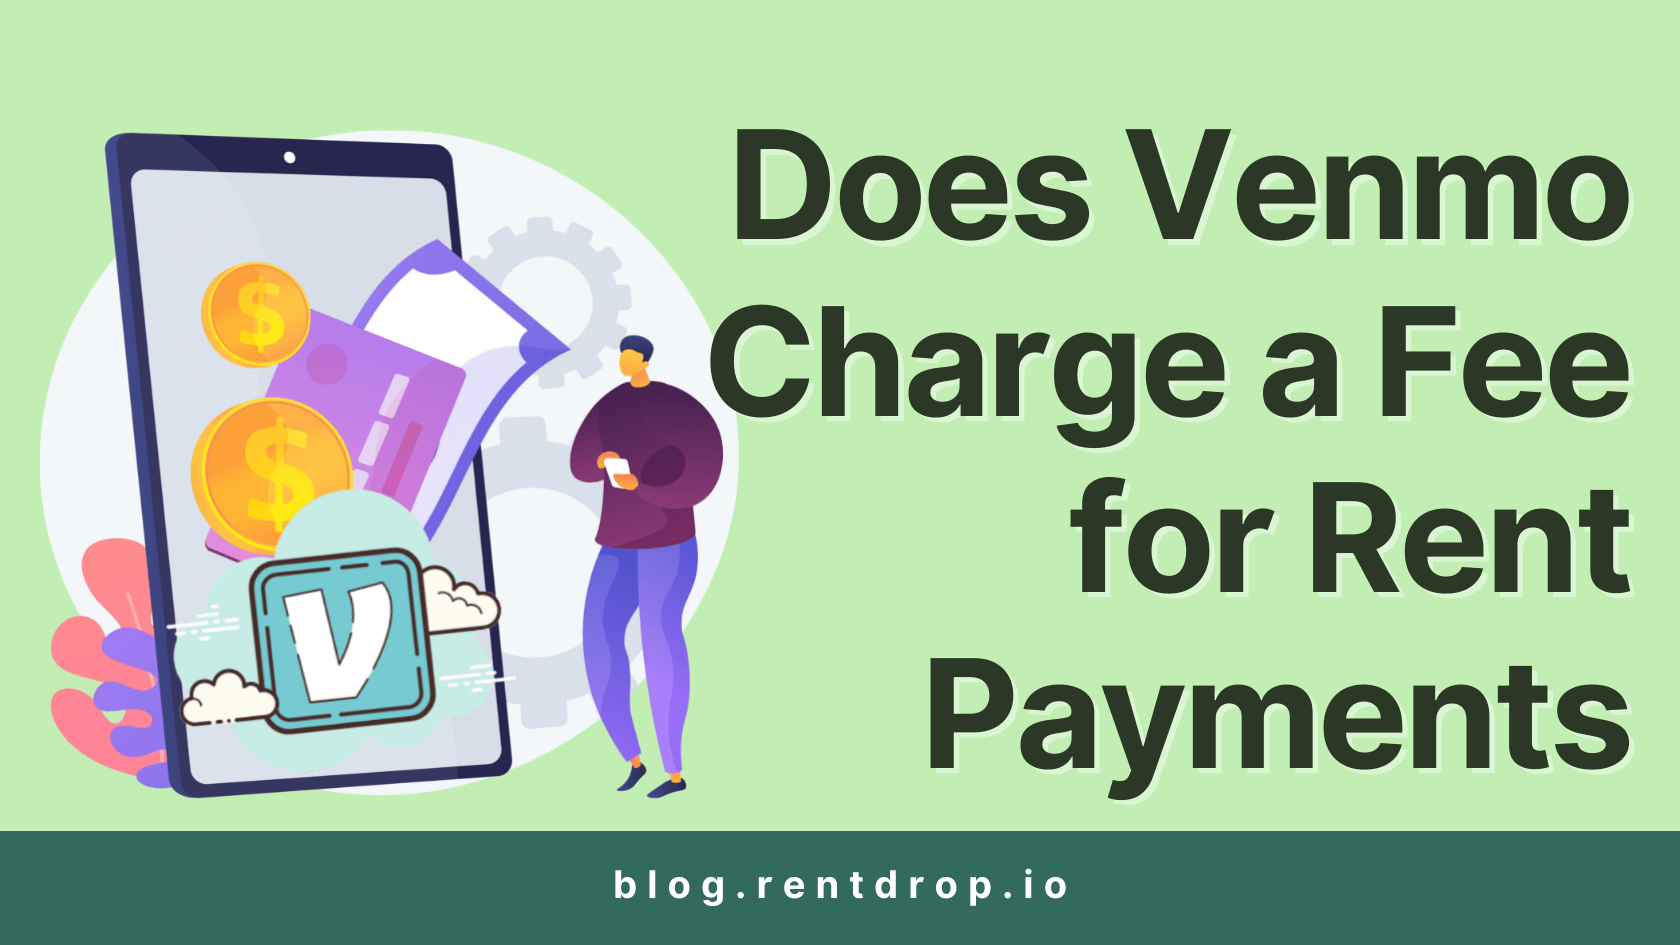 image of Does Venmo Charge a Fee for Rent Payments